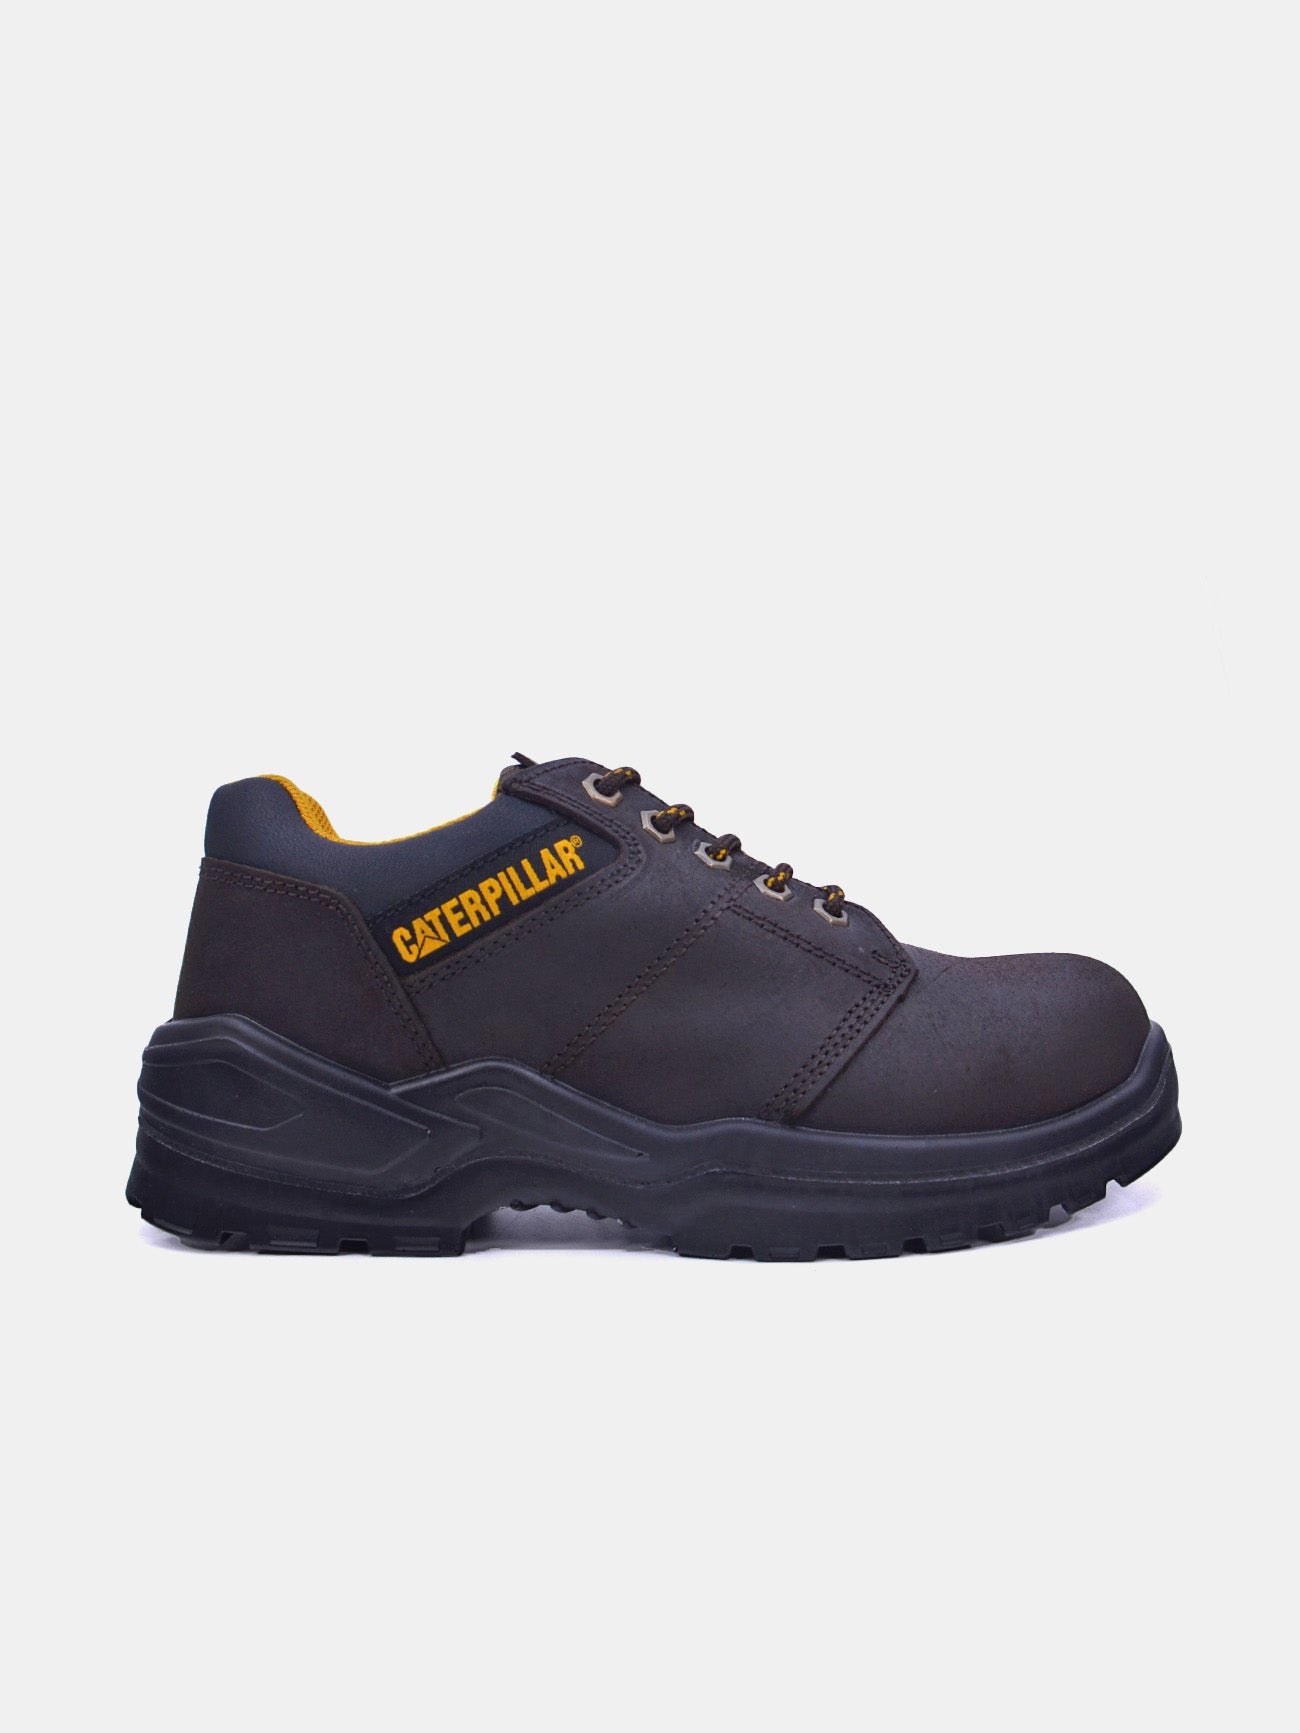 Caterpillar Men's Striver Lo ST S3 S Safety Shoes #color_Brown